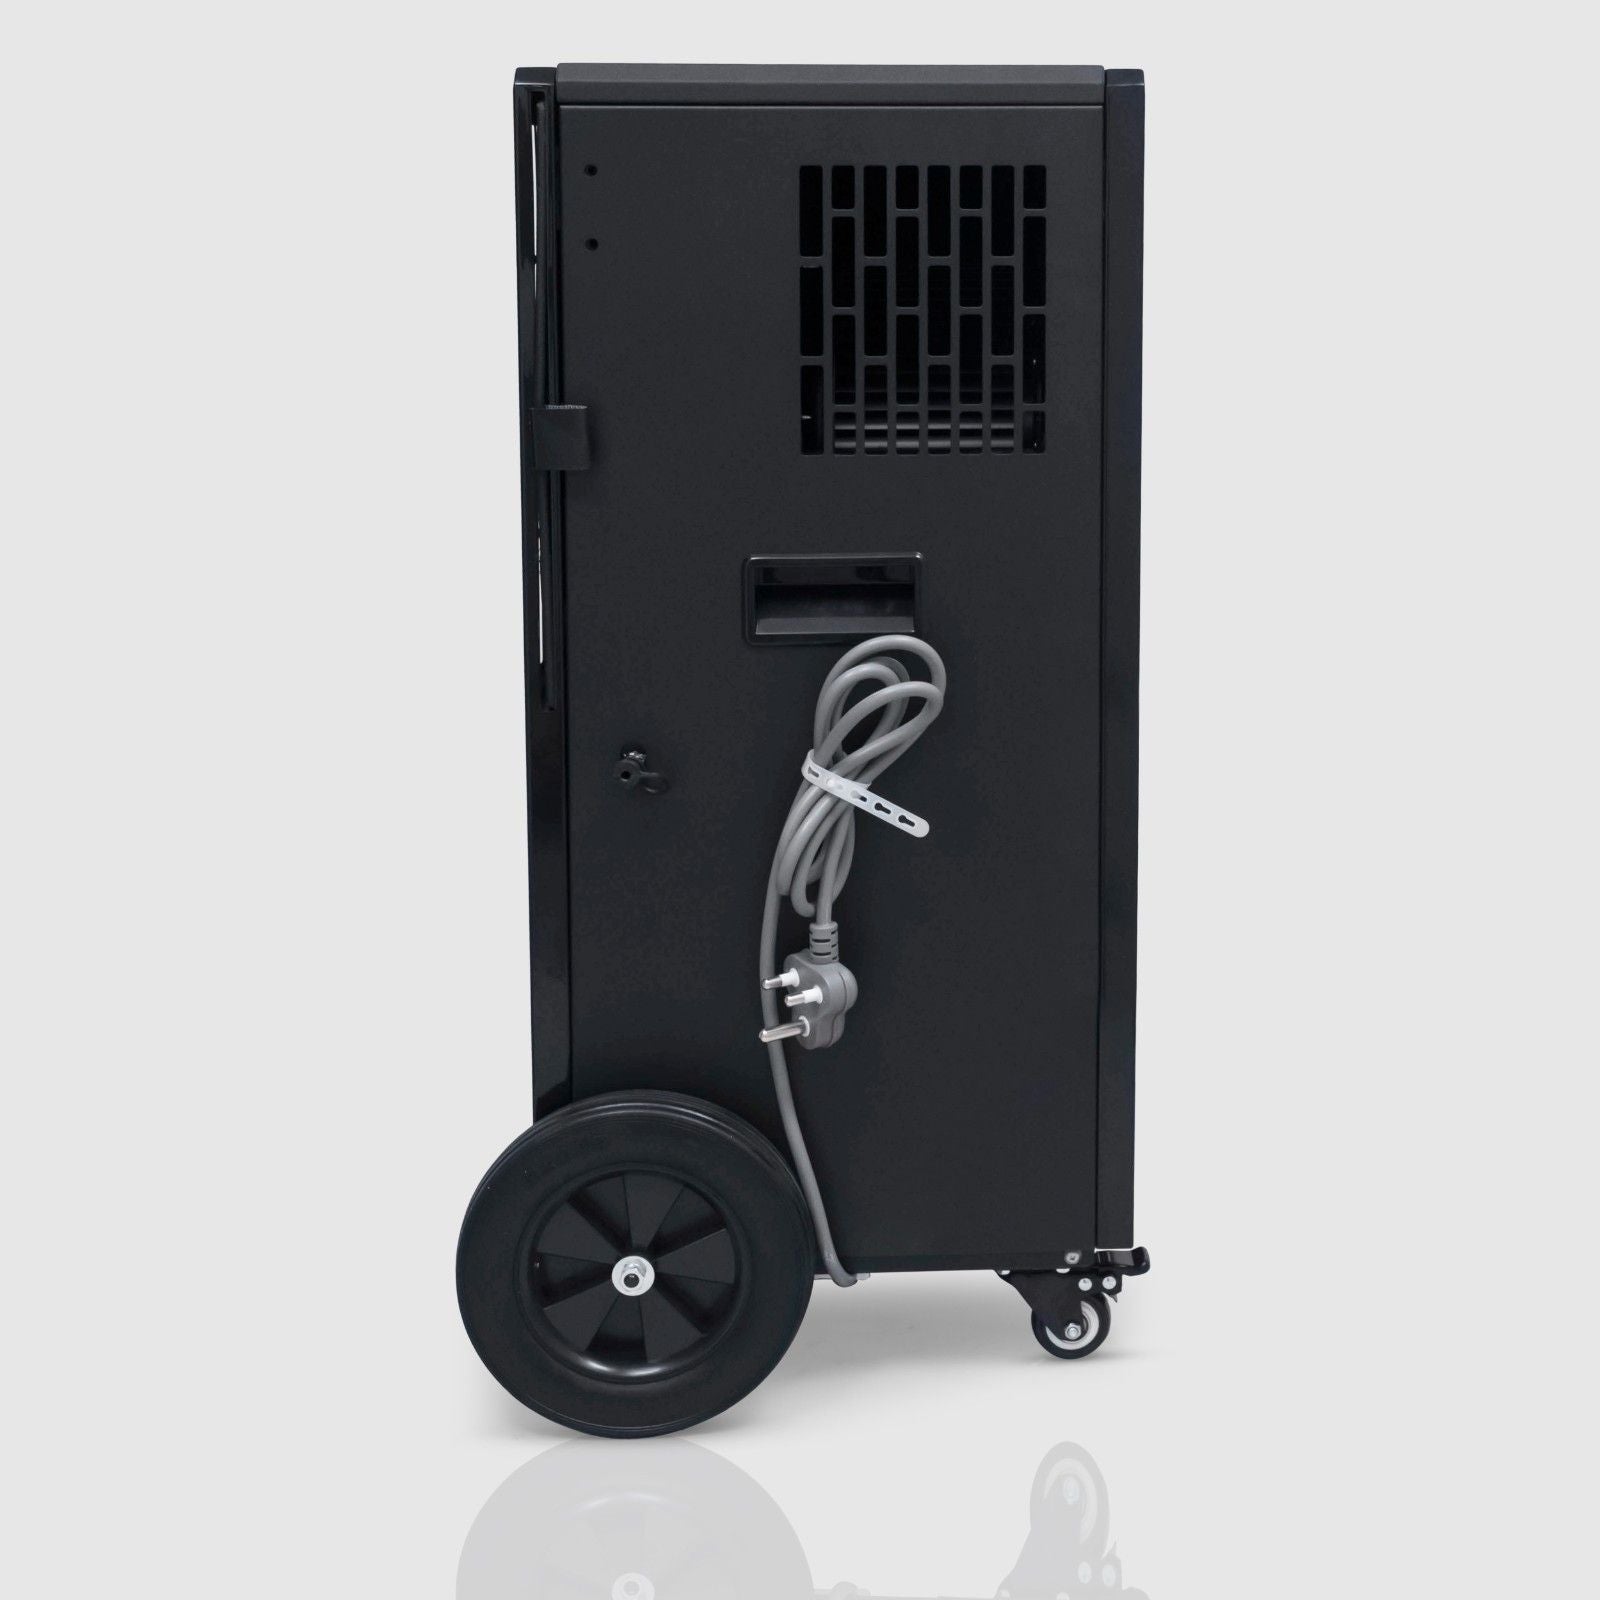 Side view of the White Westinghouse Industrial Dehumidifier WDE100, showcasing the large rear wheel, smaller front caster, and the power cord neatly wrapped on the back. The design includes a handle and vent for optimal performance, making it suitable for large commercial and industrial spaces.